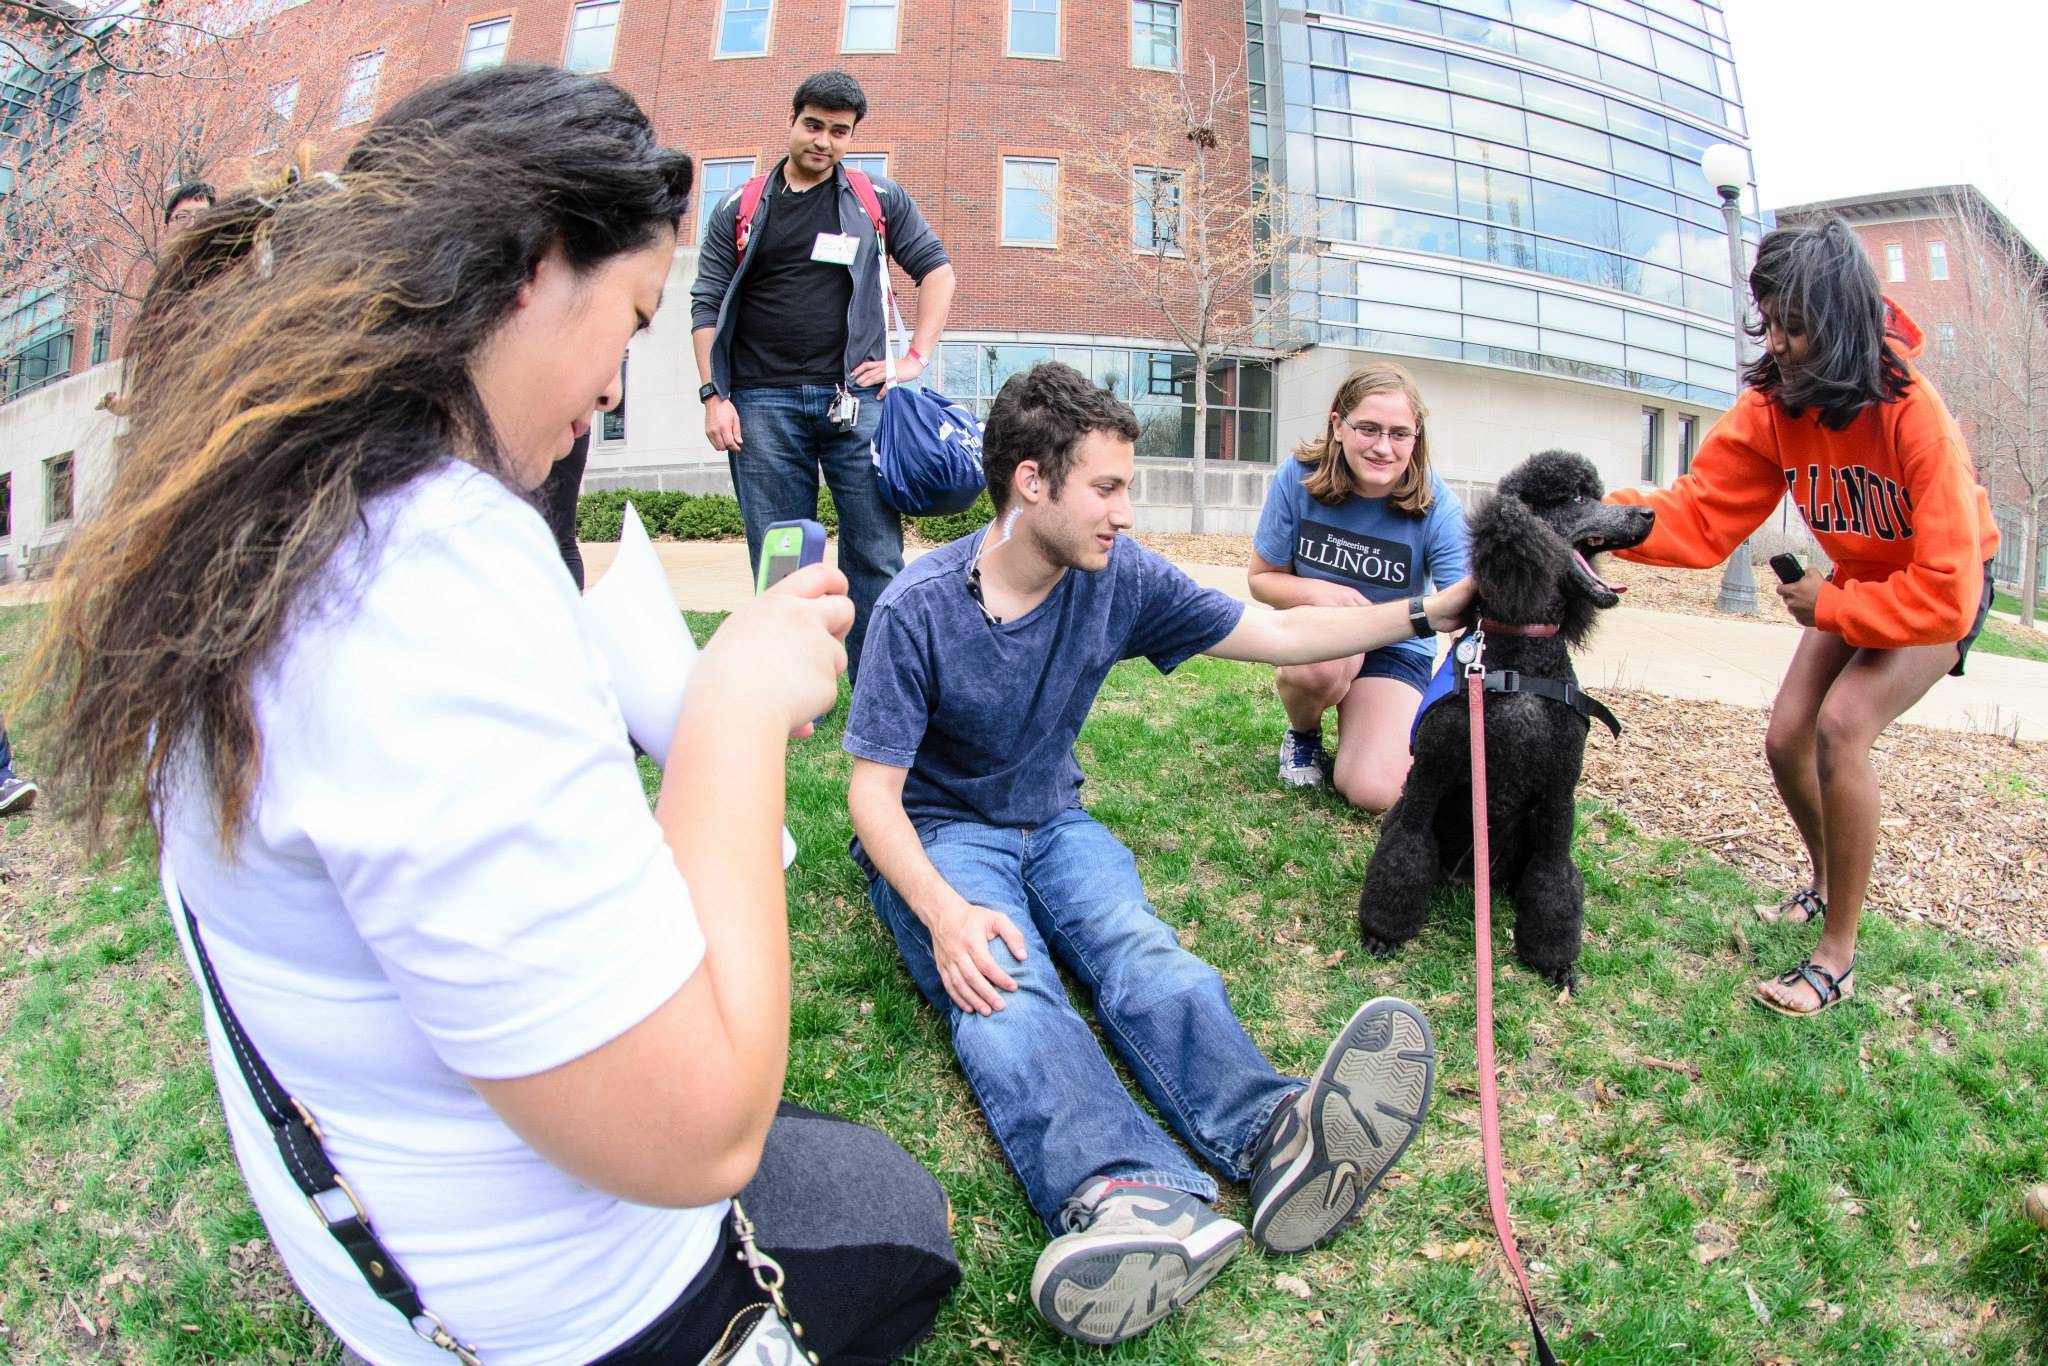 HackIllinois staff and attendees de-stress with therapy dogs (Space Puppies<sup>TM</sup>) outside of Siebel. Photo by Priten Vora.